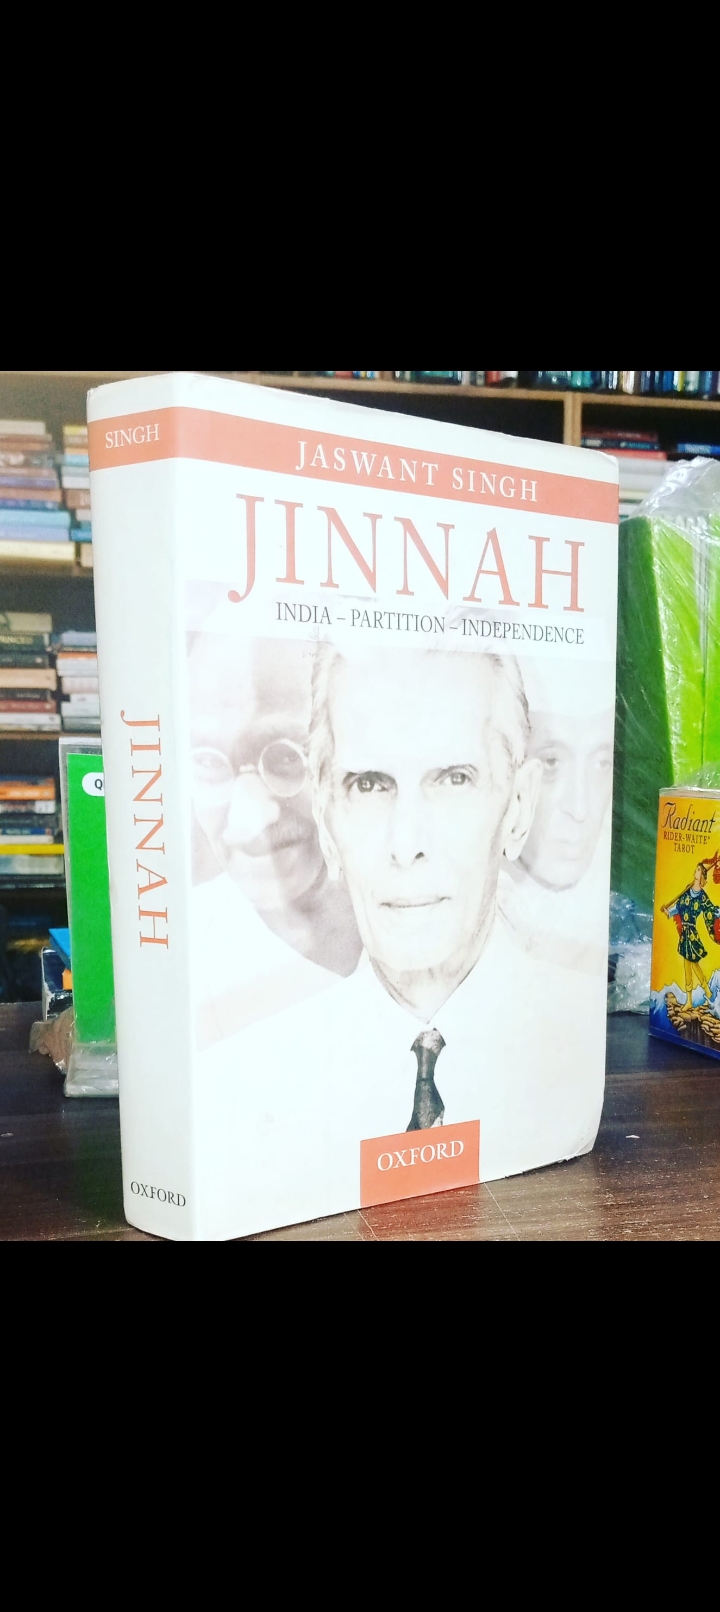 jinnah india-partition-independence by jaswant singh. original hardcover